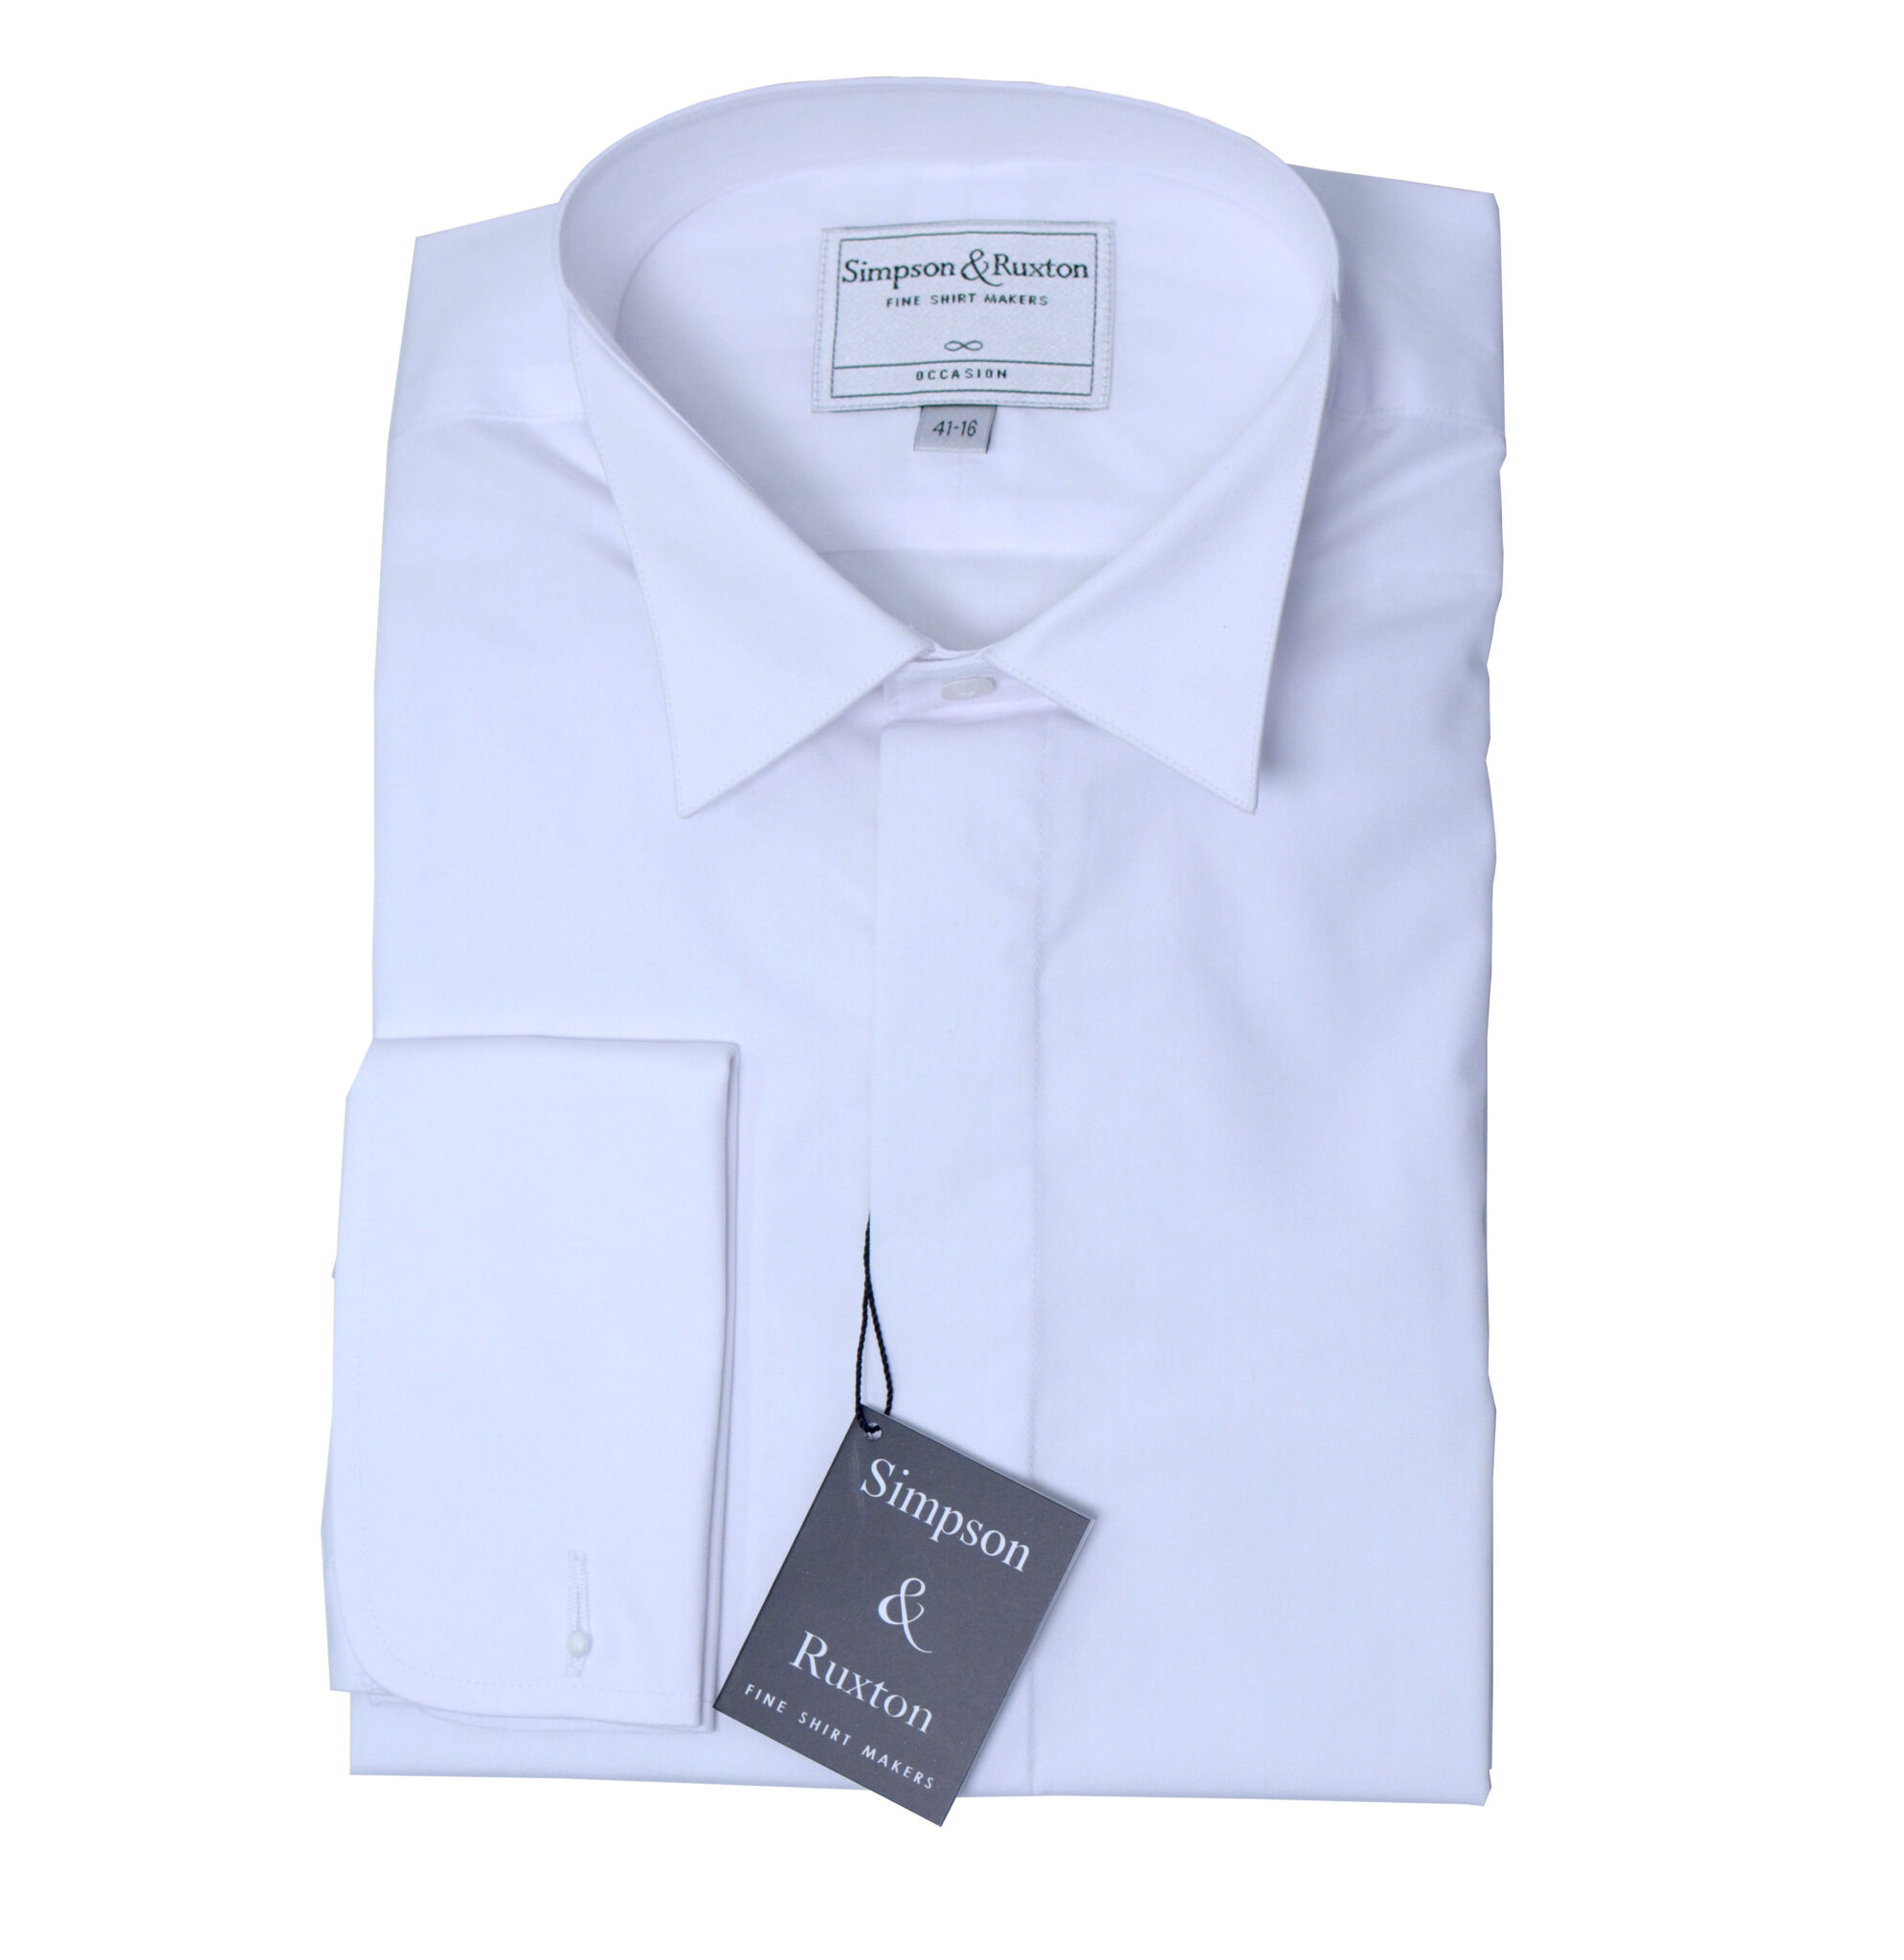 VICTORIAN WING COLLAR SHIRT - Cain of Heswall